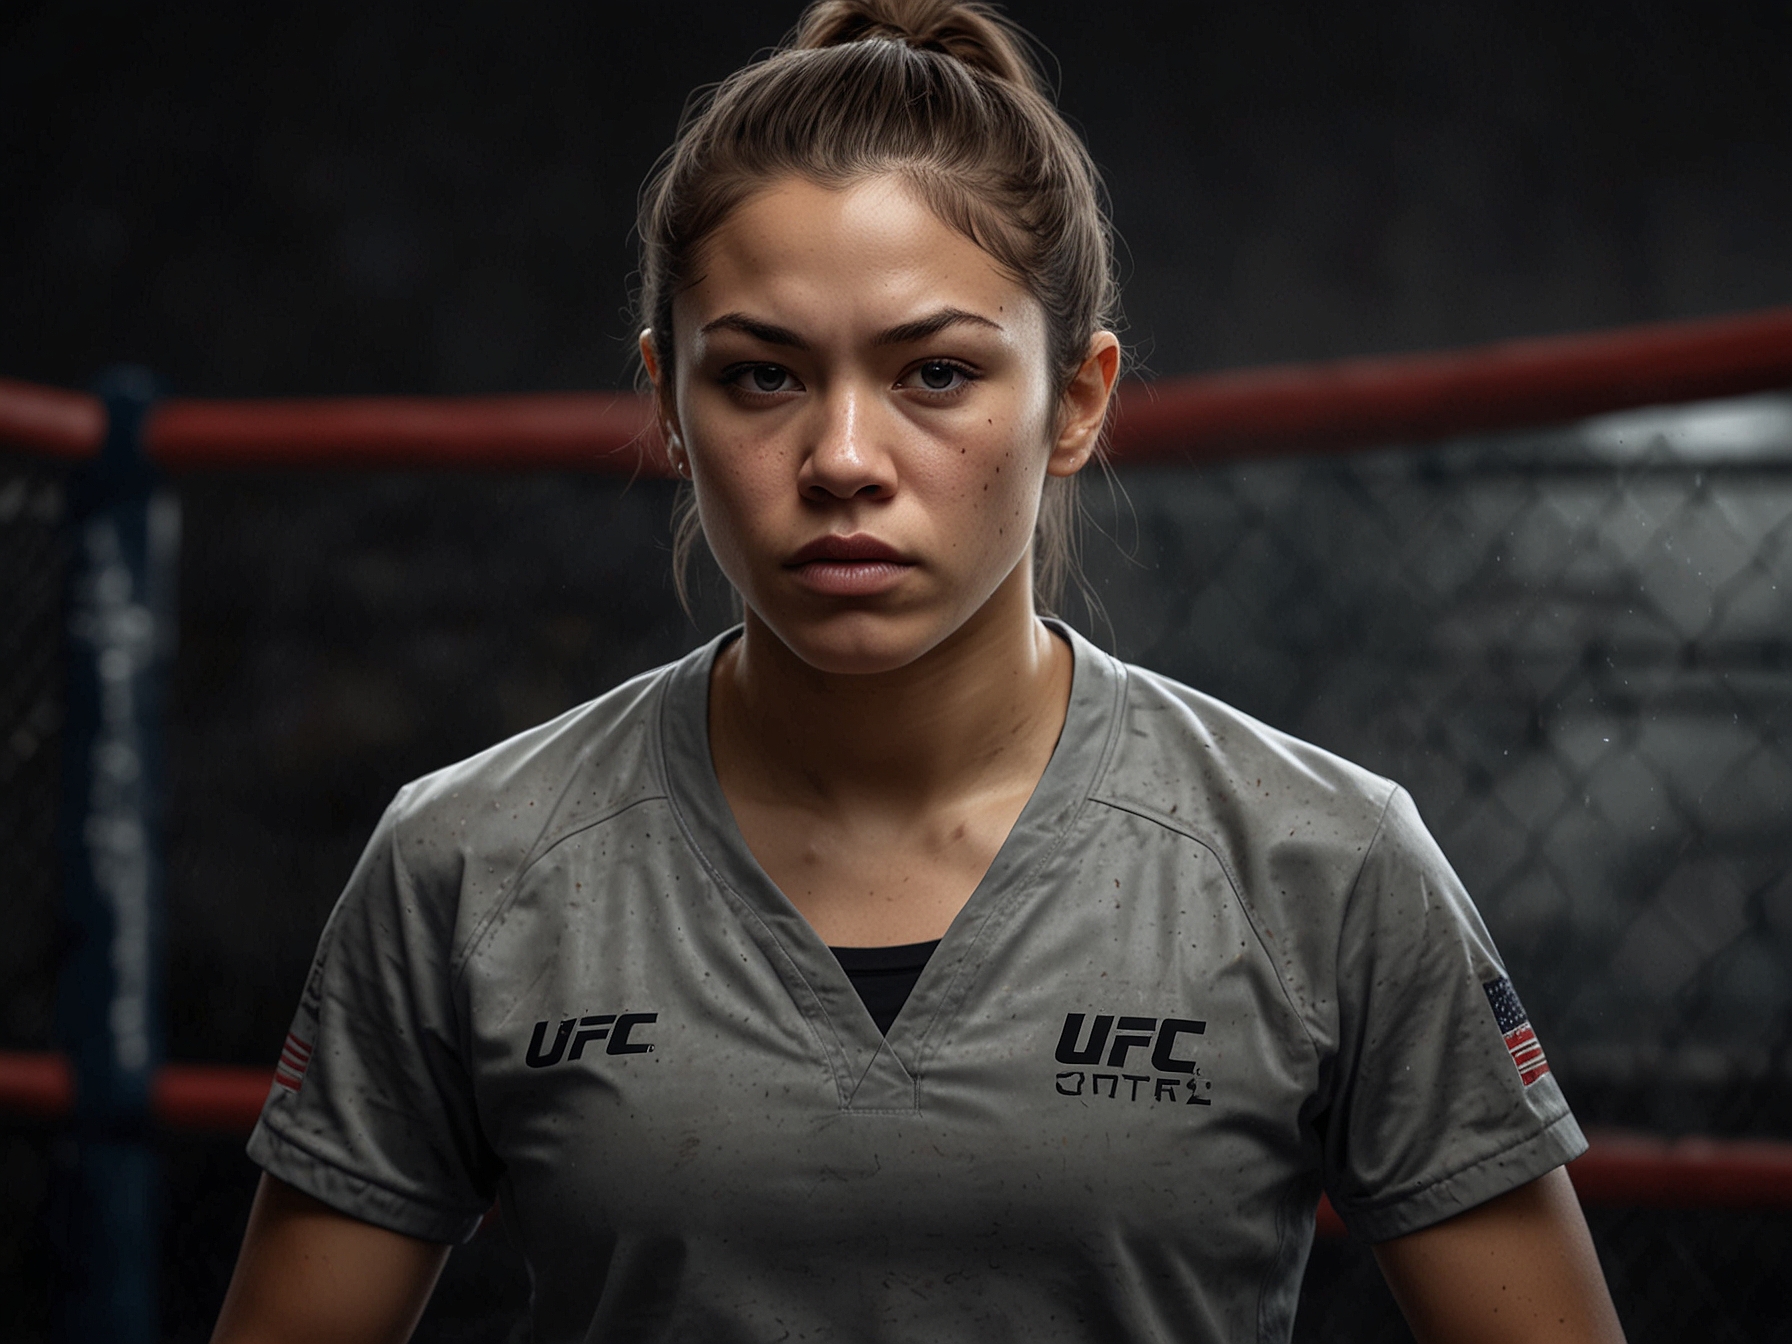 Tracy Cortez, focused and intense, perfecting her grappling skills during a training session. This image captures her preparing for the high-stakes UFC fight against Rose Namajunas.